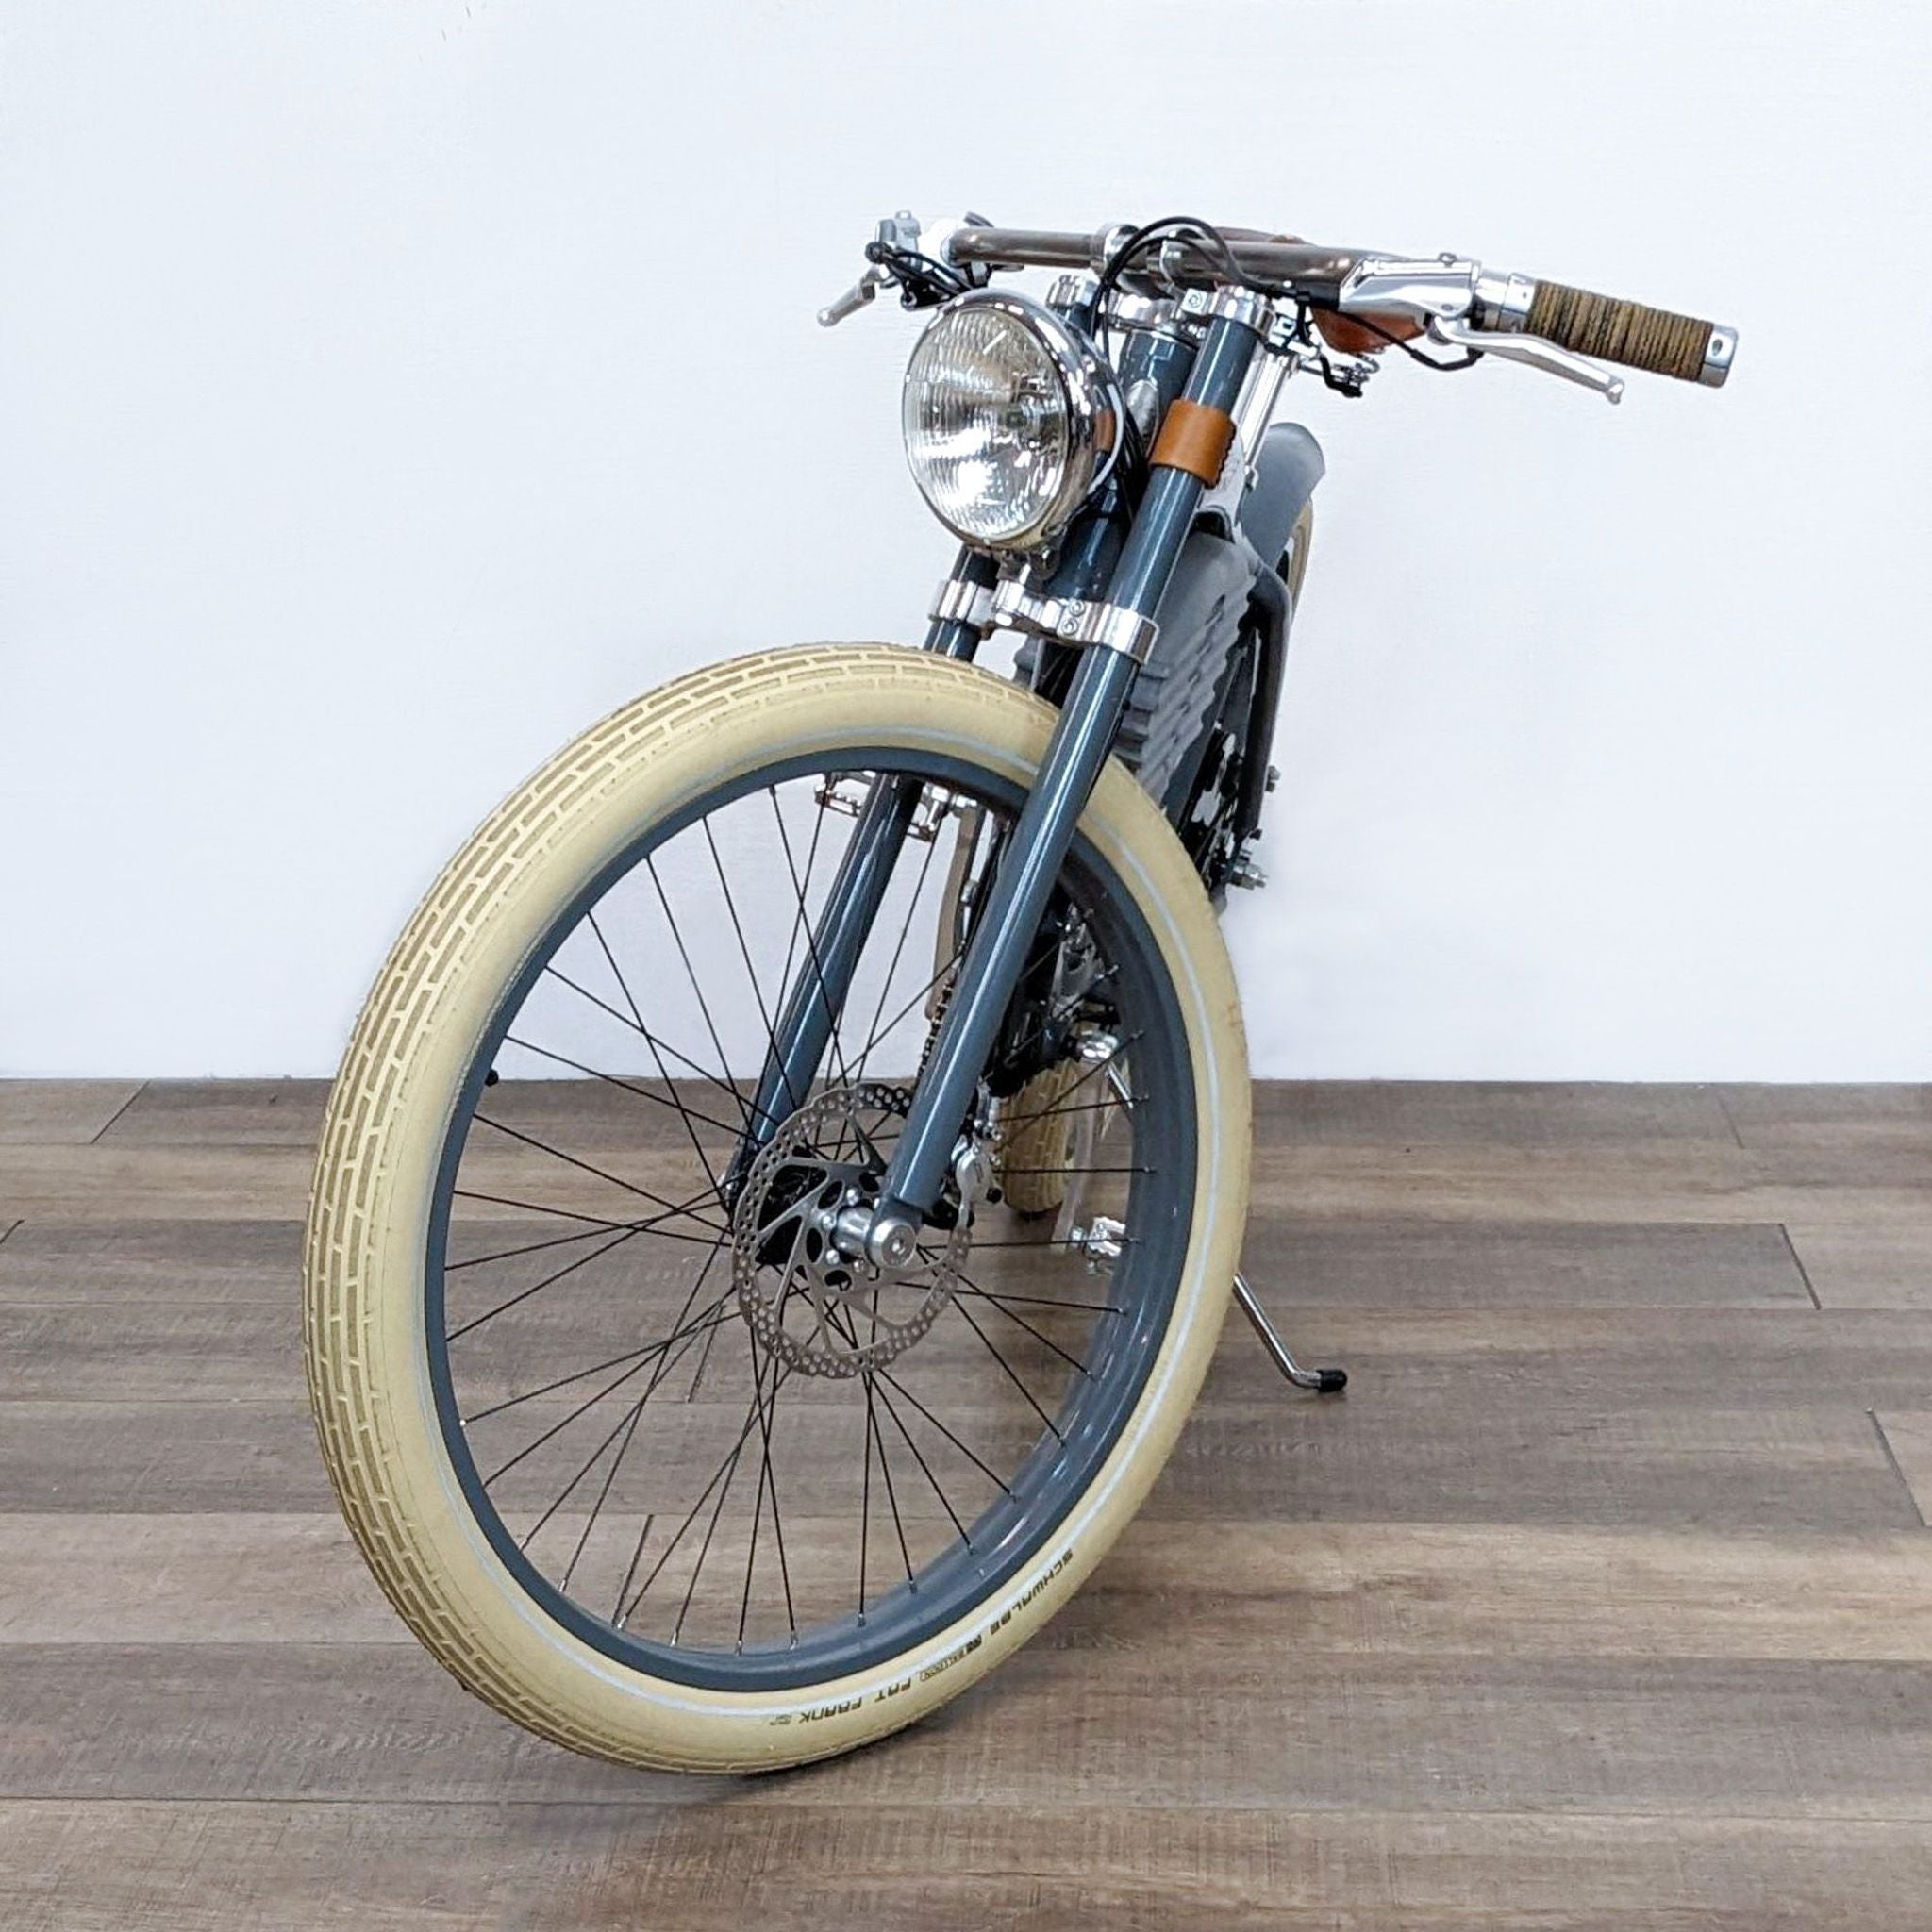 2. Front view of a Vintage Electric bicycle highlighting the headlight, brown hand grips, and the large front cream-colored wheel.